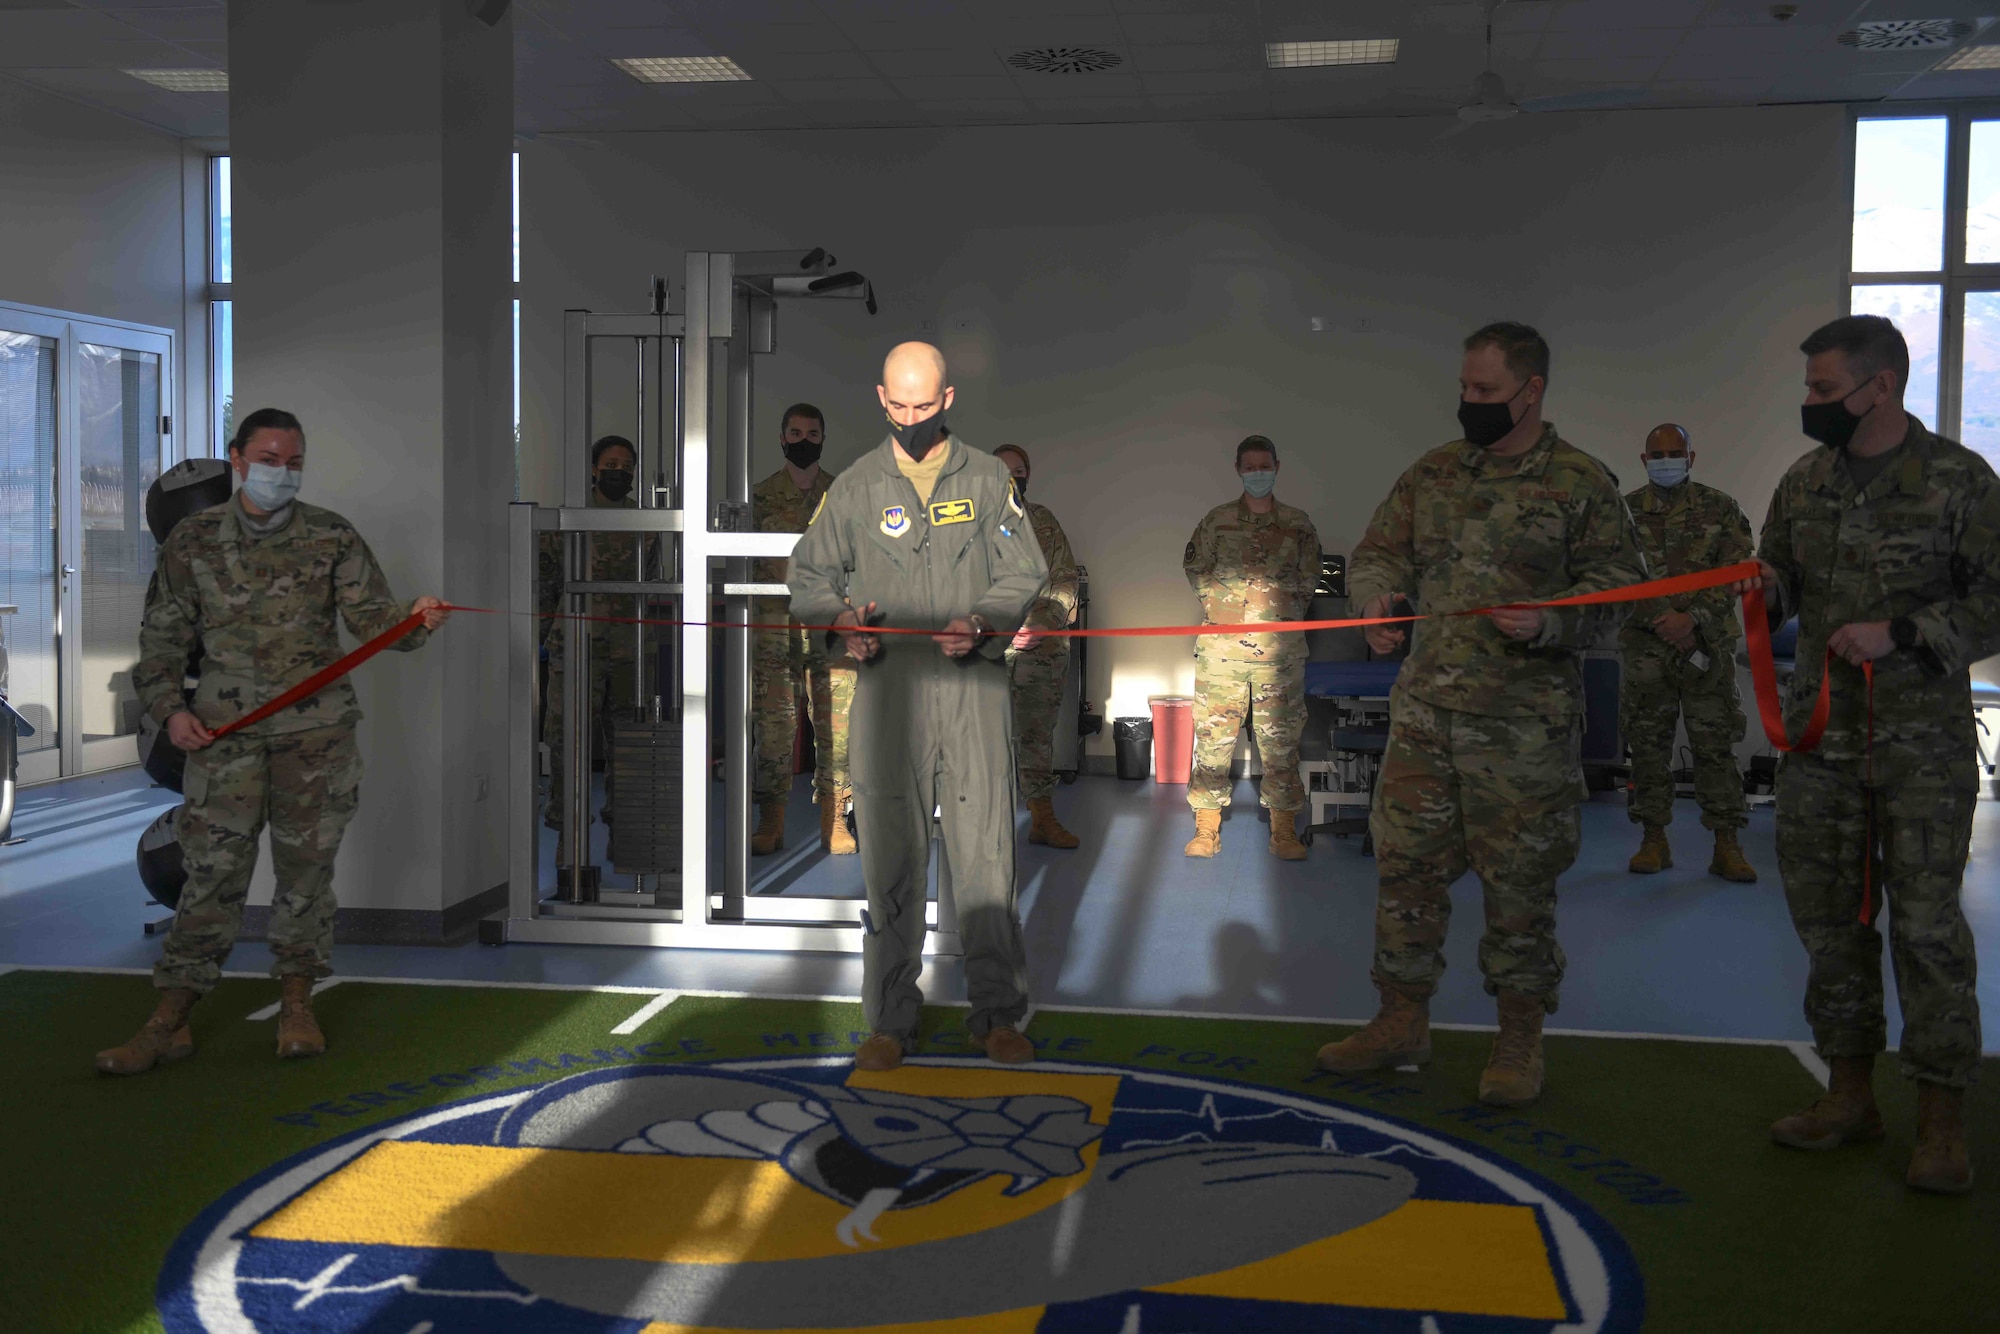 U.S. Air Force Brig. Gen. Jason E. Bailey, 31st Fighter Wing commander, participates in a ribbon-cutting ceremony at the Comprehensive Operational Medicine for Battle Ready Airmen (COBRA) Clinic with Airmen from the 31st Medical Group at Aviano Air Base, Italy, Jan. 14, 2021. The COBRA clinic is a newly innovated program unique to Aviano and designed to focus on readiness by preventing or reducing mental health and musculoskeletal profiles of our Airmen. The COBRA clinic is based on a hub and spoke model of care incorporating diagnosis, recovery, rehabilitation, and performance optimization into a single unified mission. (U.S. Air Force photo by Senior Airman Ericka A. Woolever)